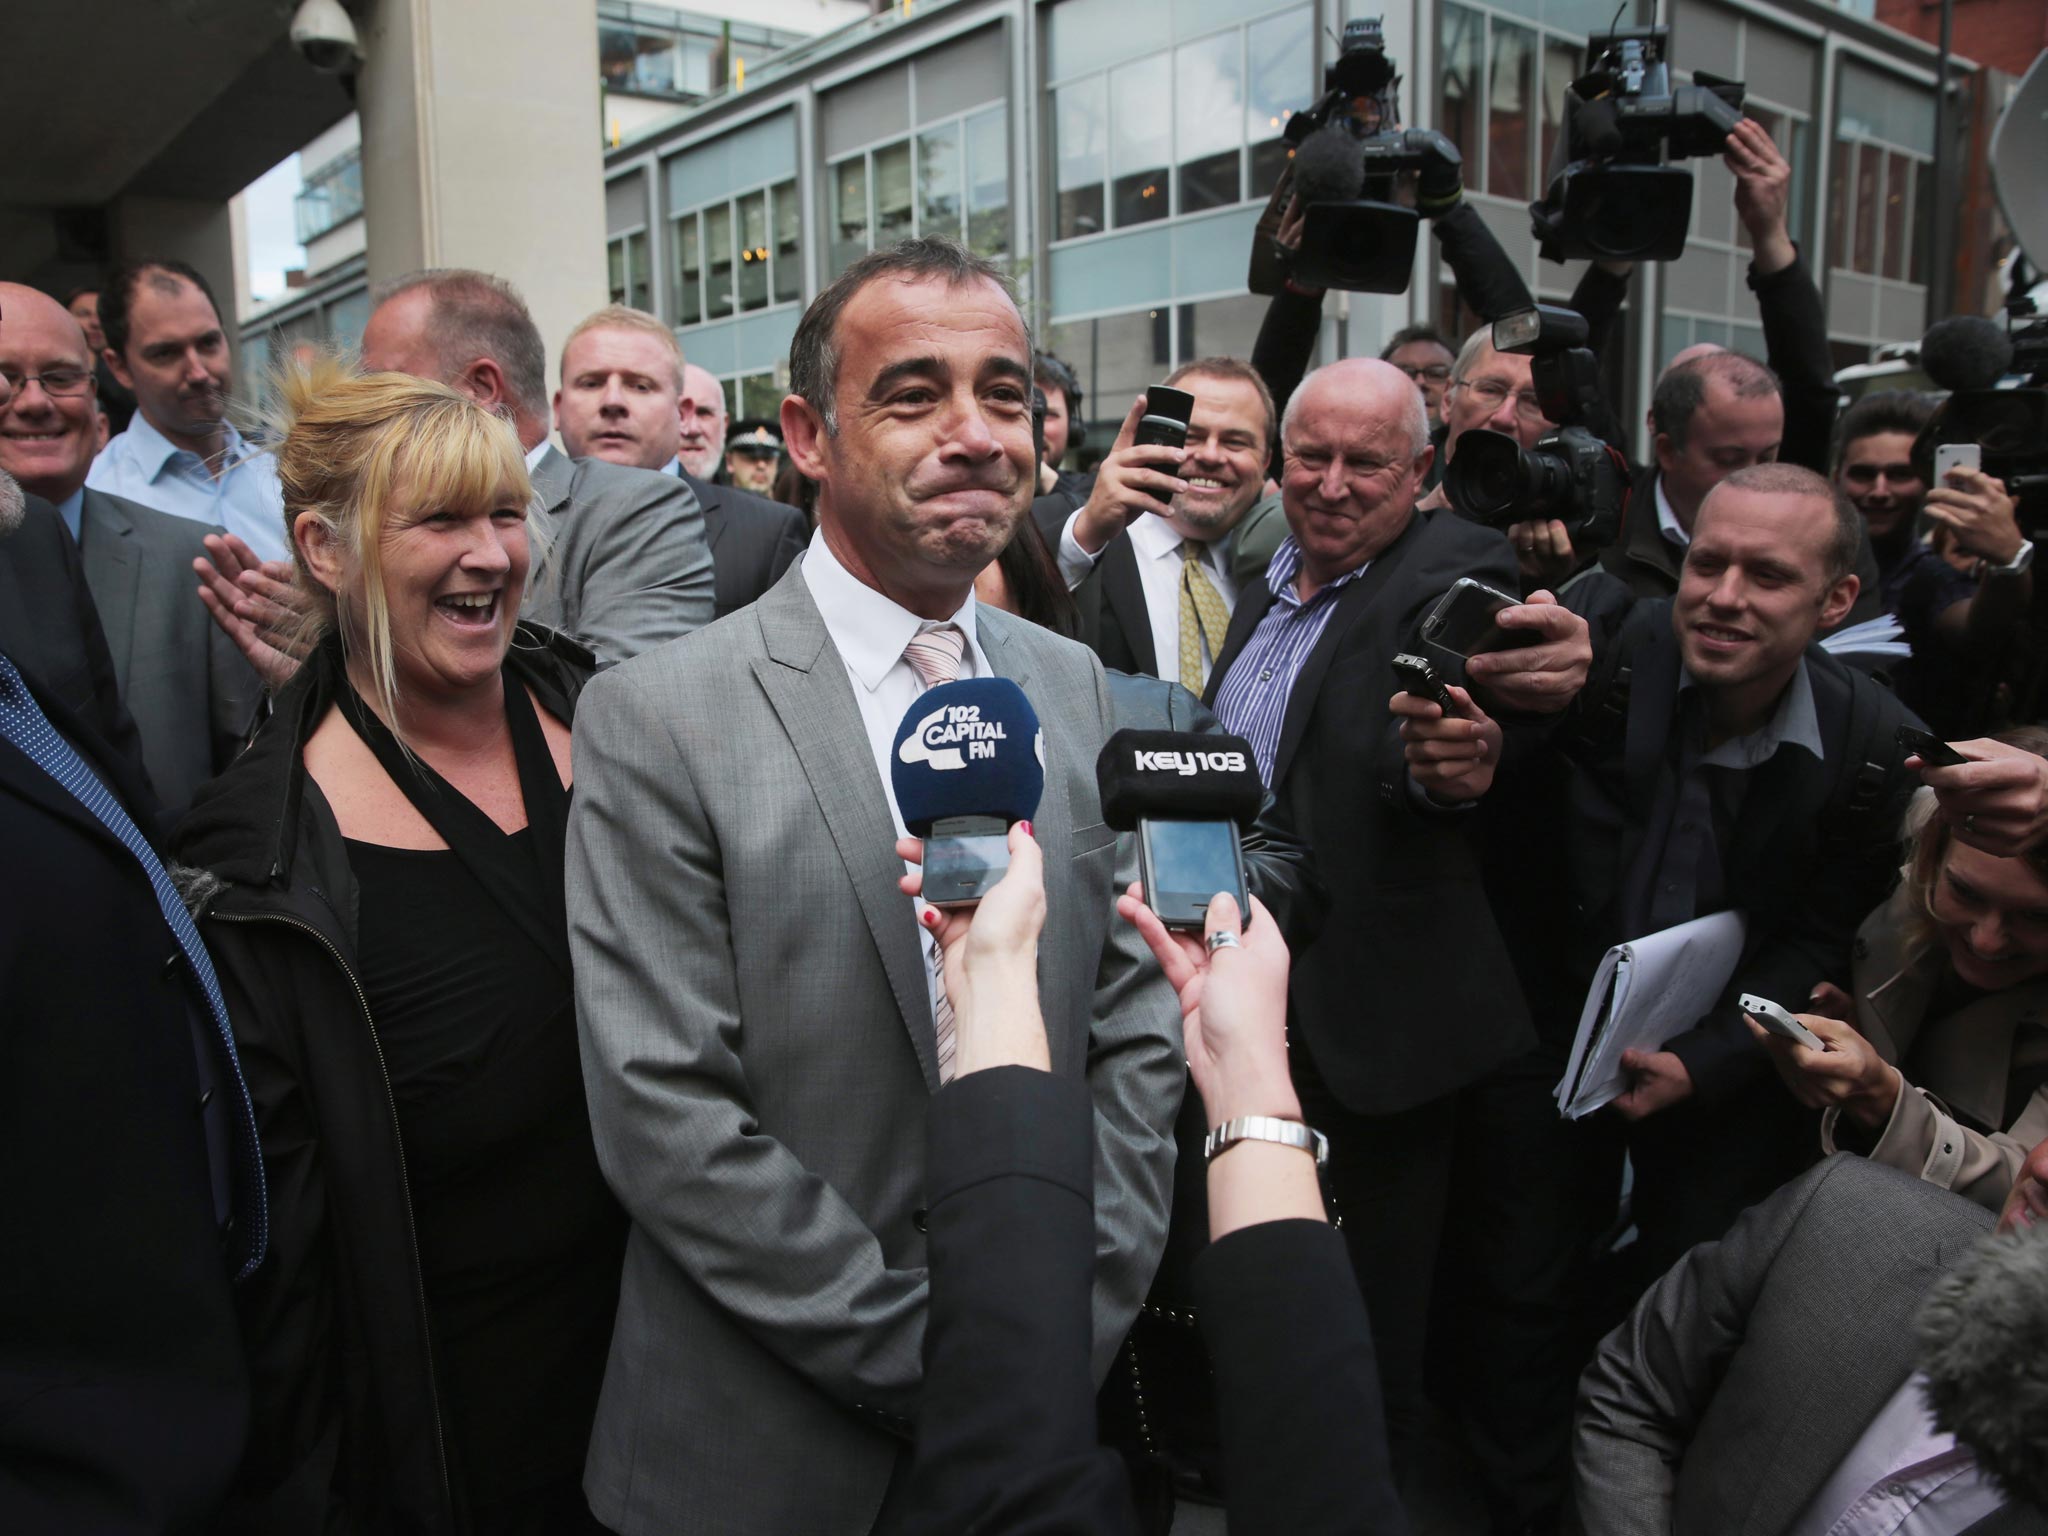 Coronation Street actor Michael Le Vell has been cleared of historical sex allegations